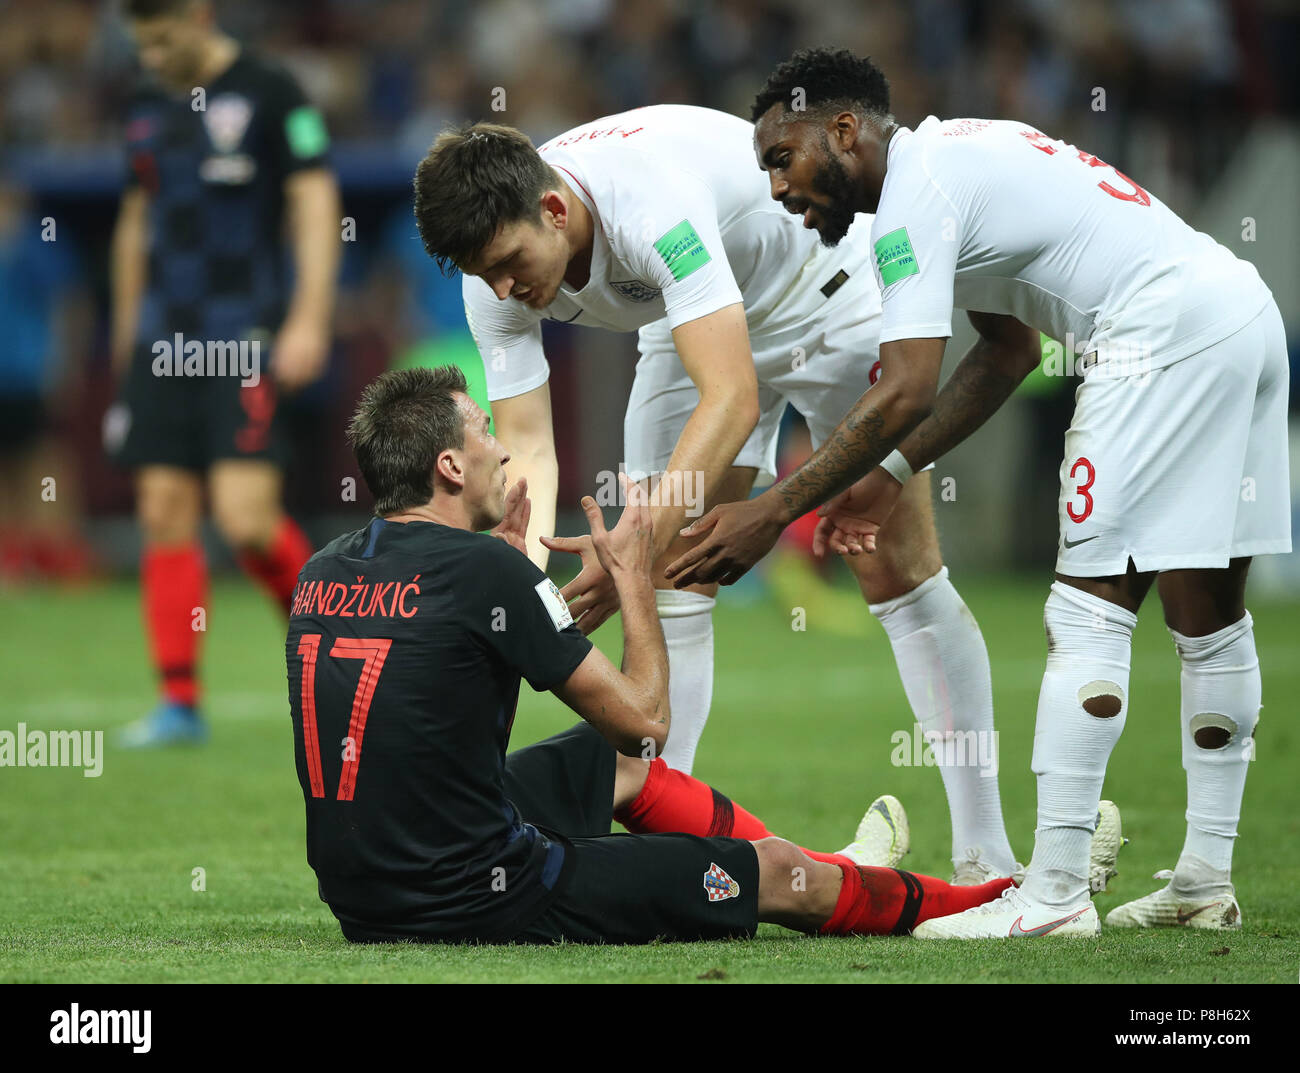 Moscow, Russia. 11th July, 2018. England's Danny Rose (R top) and Harry Maguire (L top) talk with Mario Mandzukic of Croatia during the 2018 FIFA World Cup semi-final match between England and Croatia in Moscow, Russia, July 11, 2018. Croatia won 2-1 and advanced to the final. Credit: Wu Zhuang/Xinhua/Alamy Live News Stock Photo